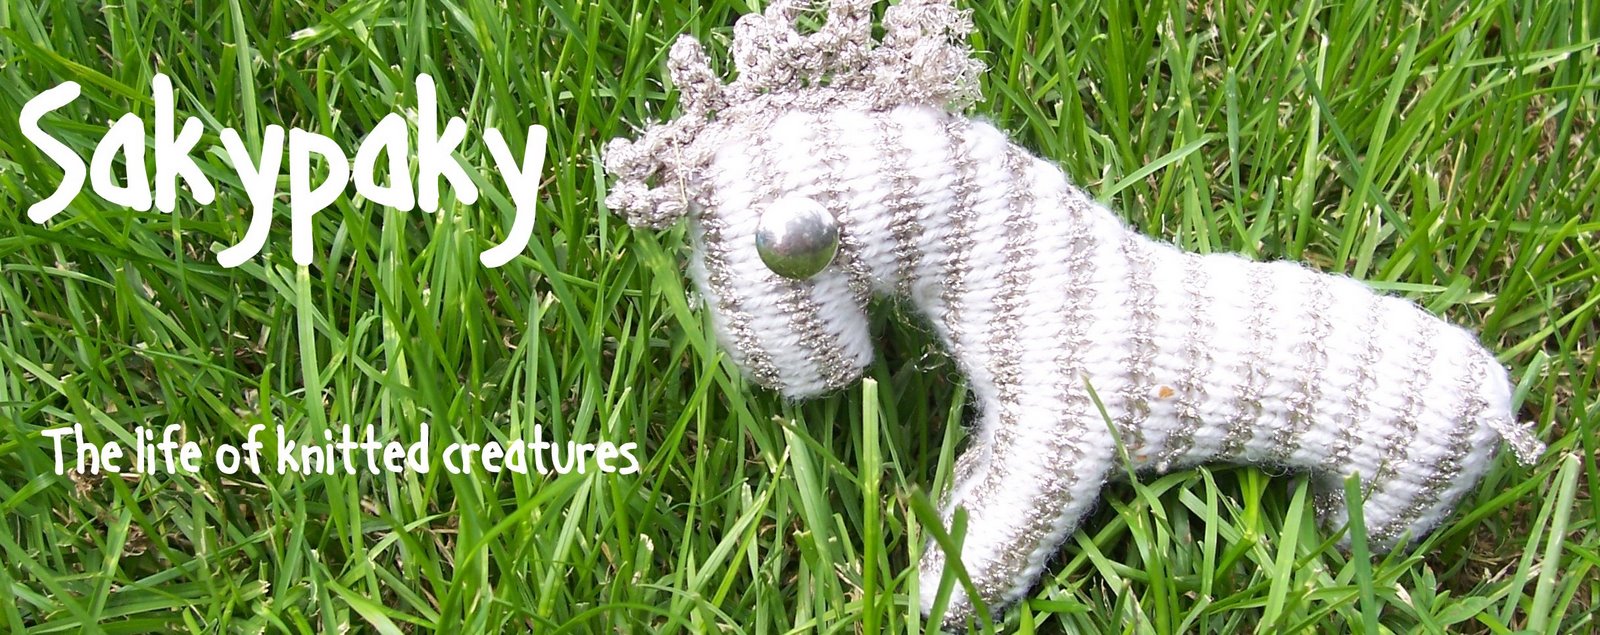 Sakypaky - The life of knitted creatures